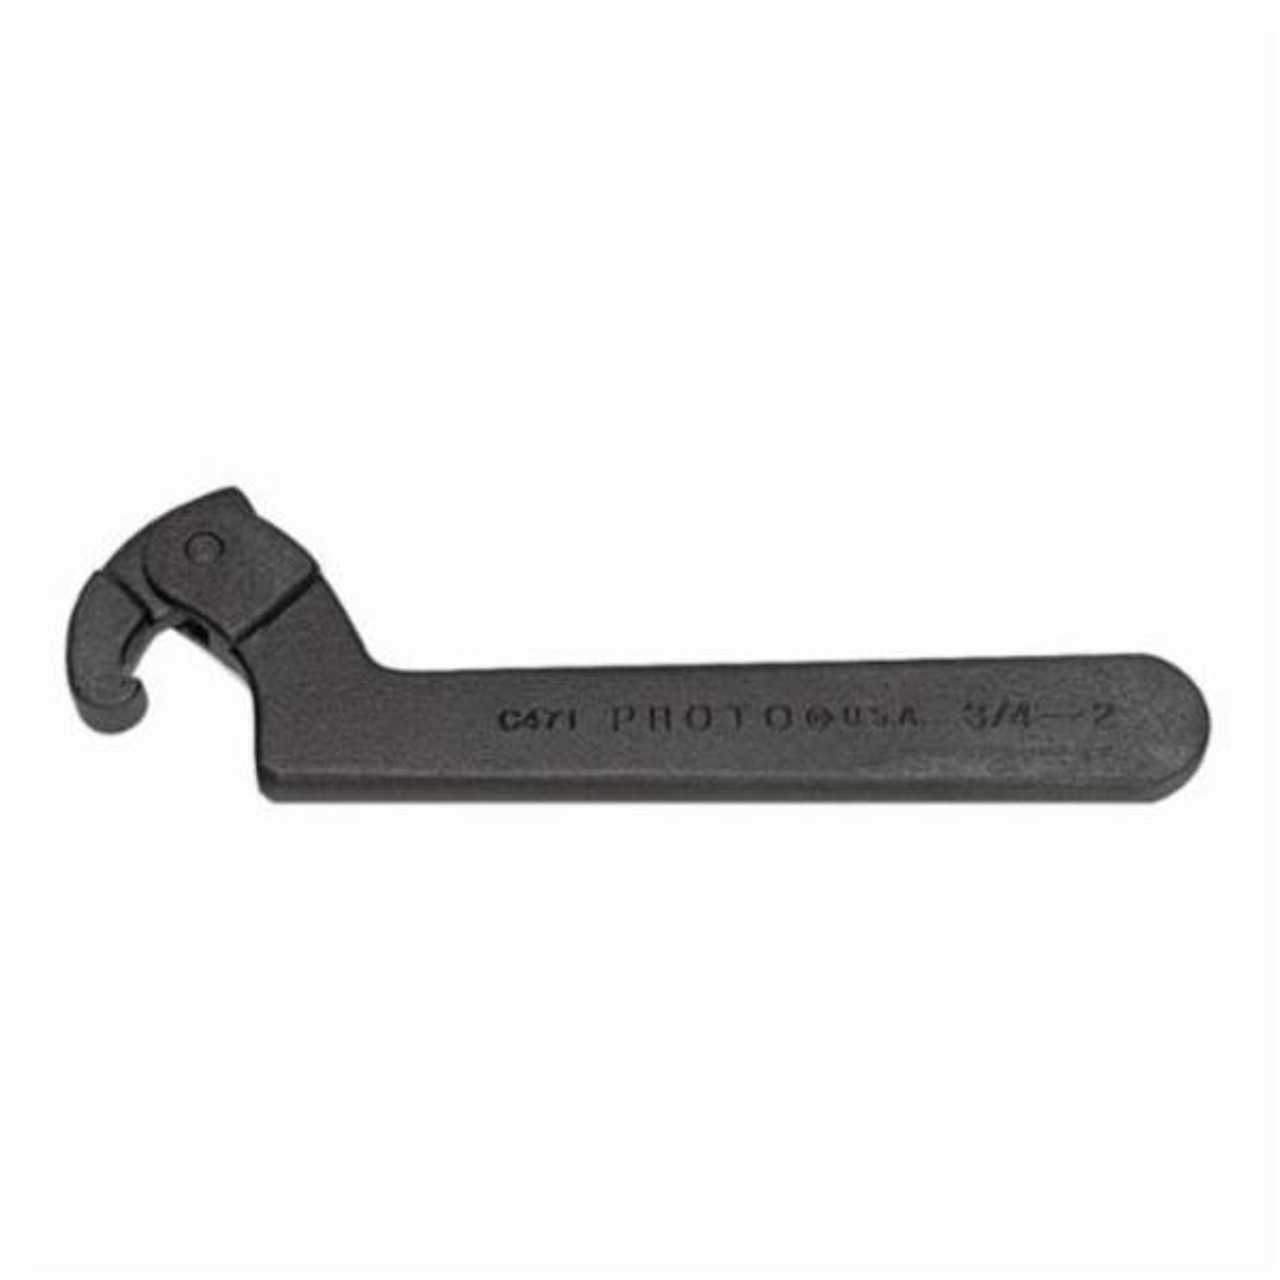 ADJUSTABLE HOOK SPANNER WRENCH 1-1/4 TO 3 (PRO-JC472)